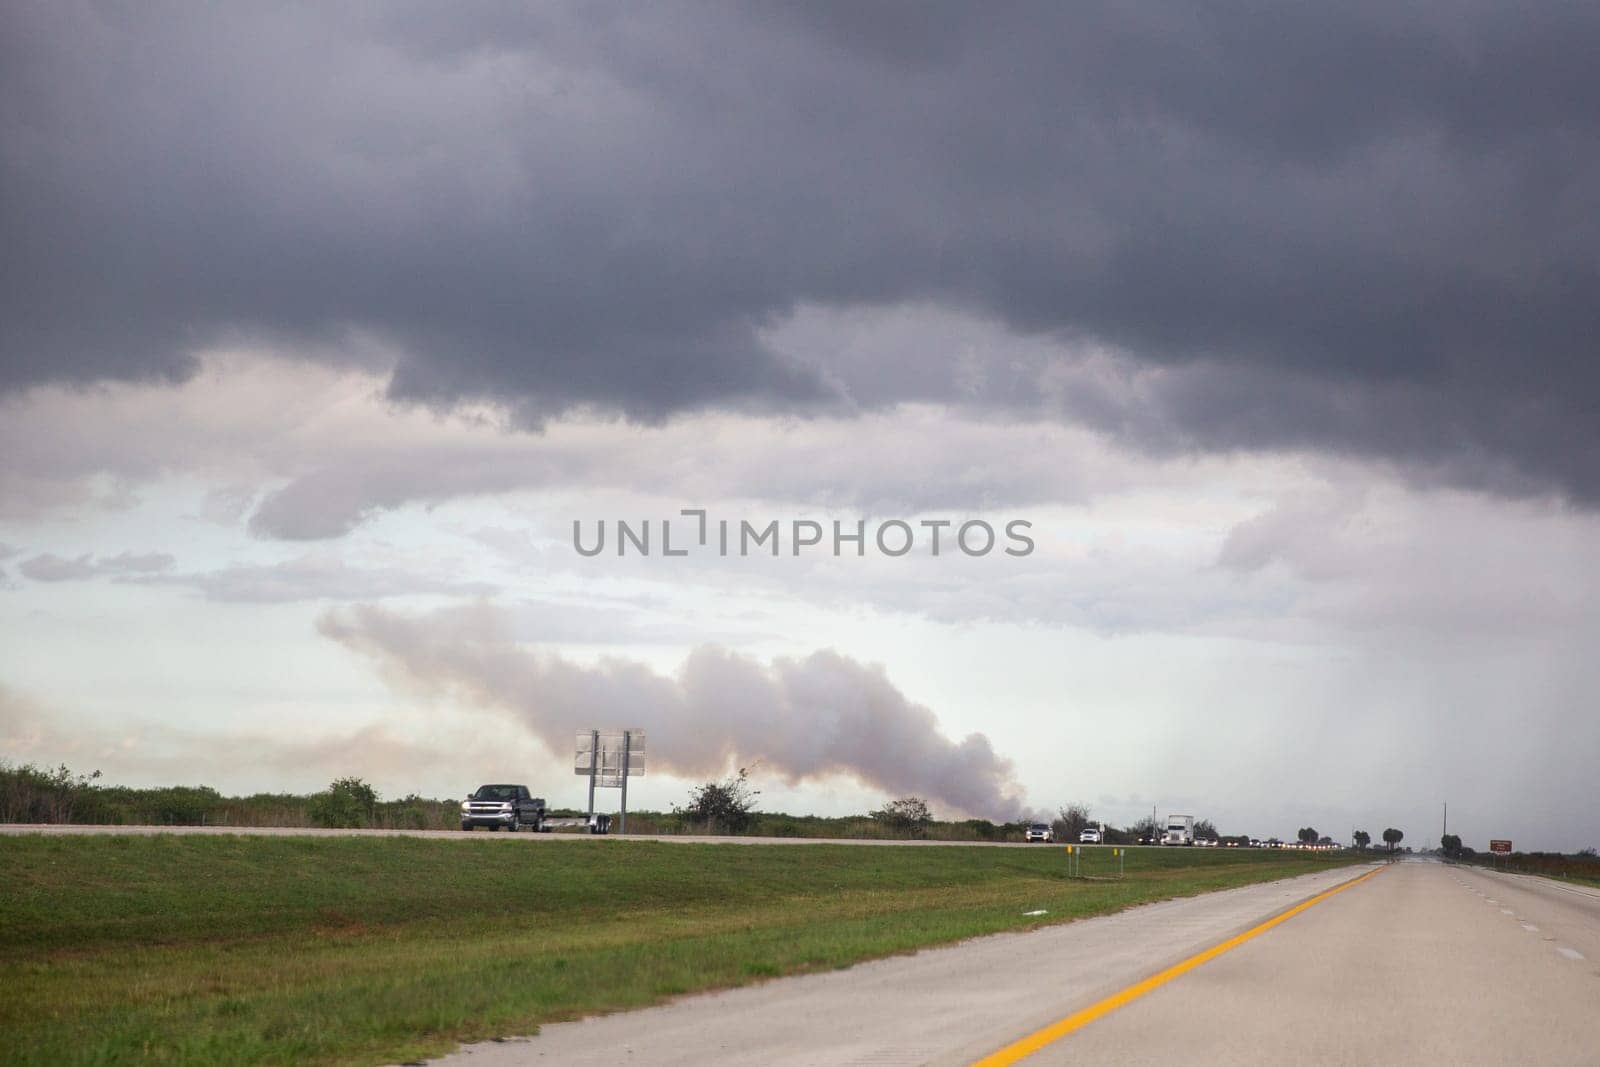 People Evacuating on Alligator Alley by TopCreativePhotography